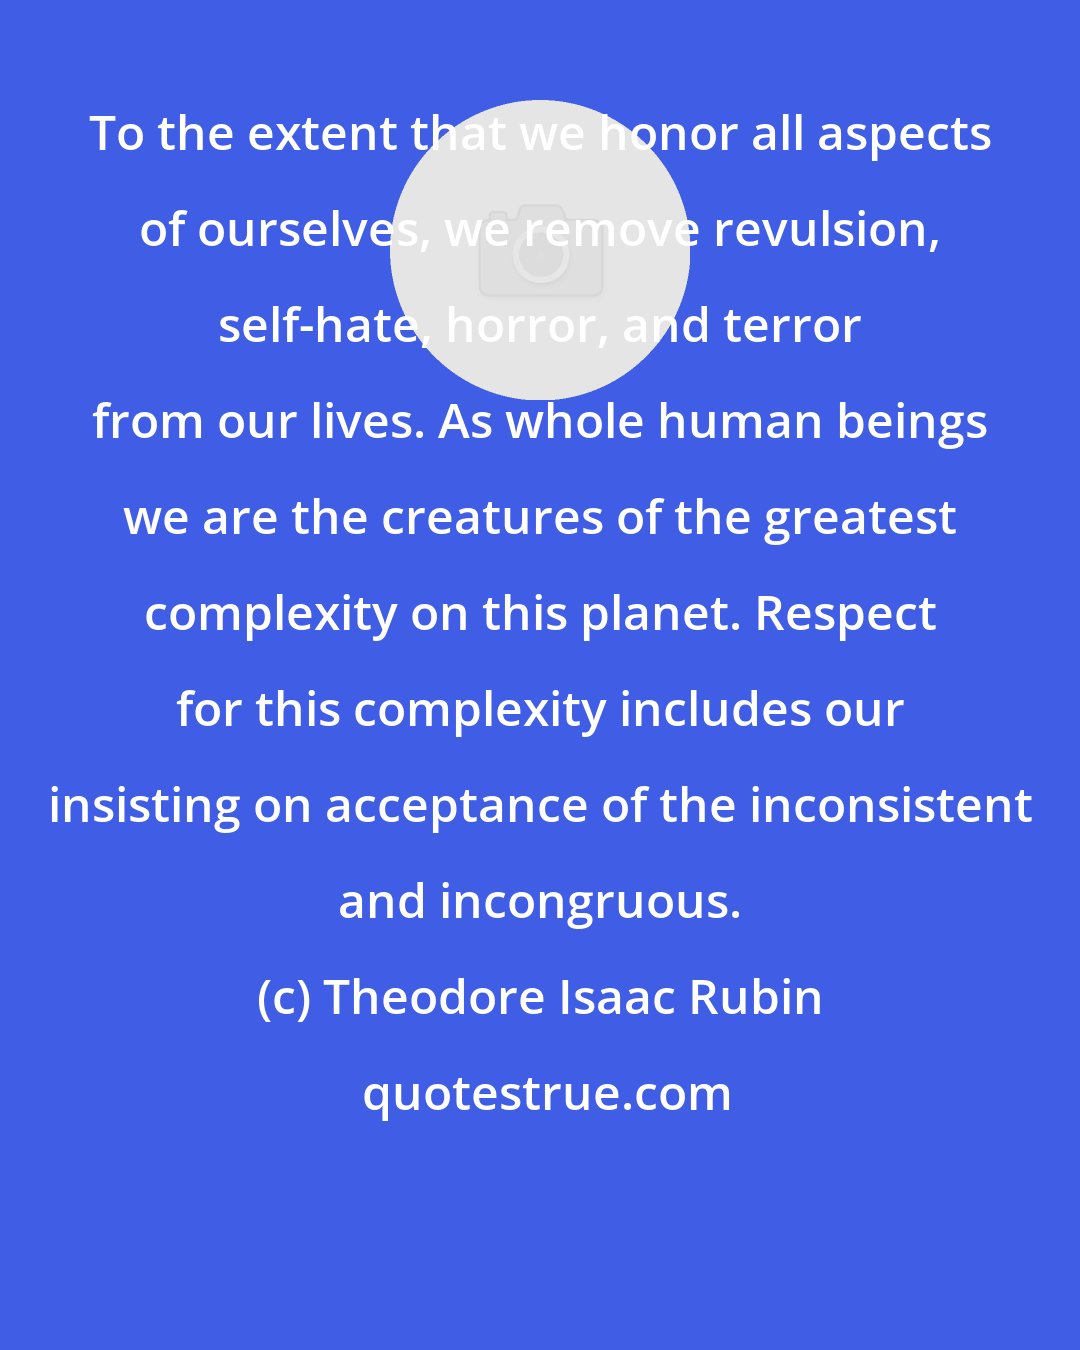 Theodore Isaac Rubin: To the extent that we honor all aspects of ourselves, we remove revulsion, self-hate, horror, and terror from our lives. As whole human beings we are the creatures of the greatest complexity on this planet. Respect for this complexity includes our insisting on acceptance of the inconsistent and incongruous.